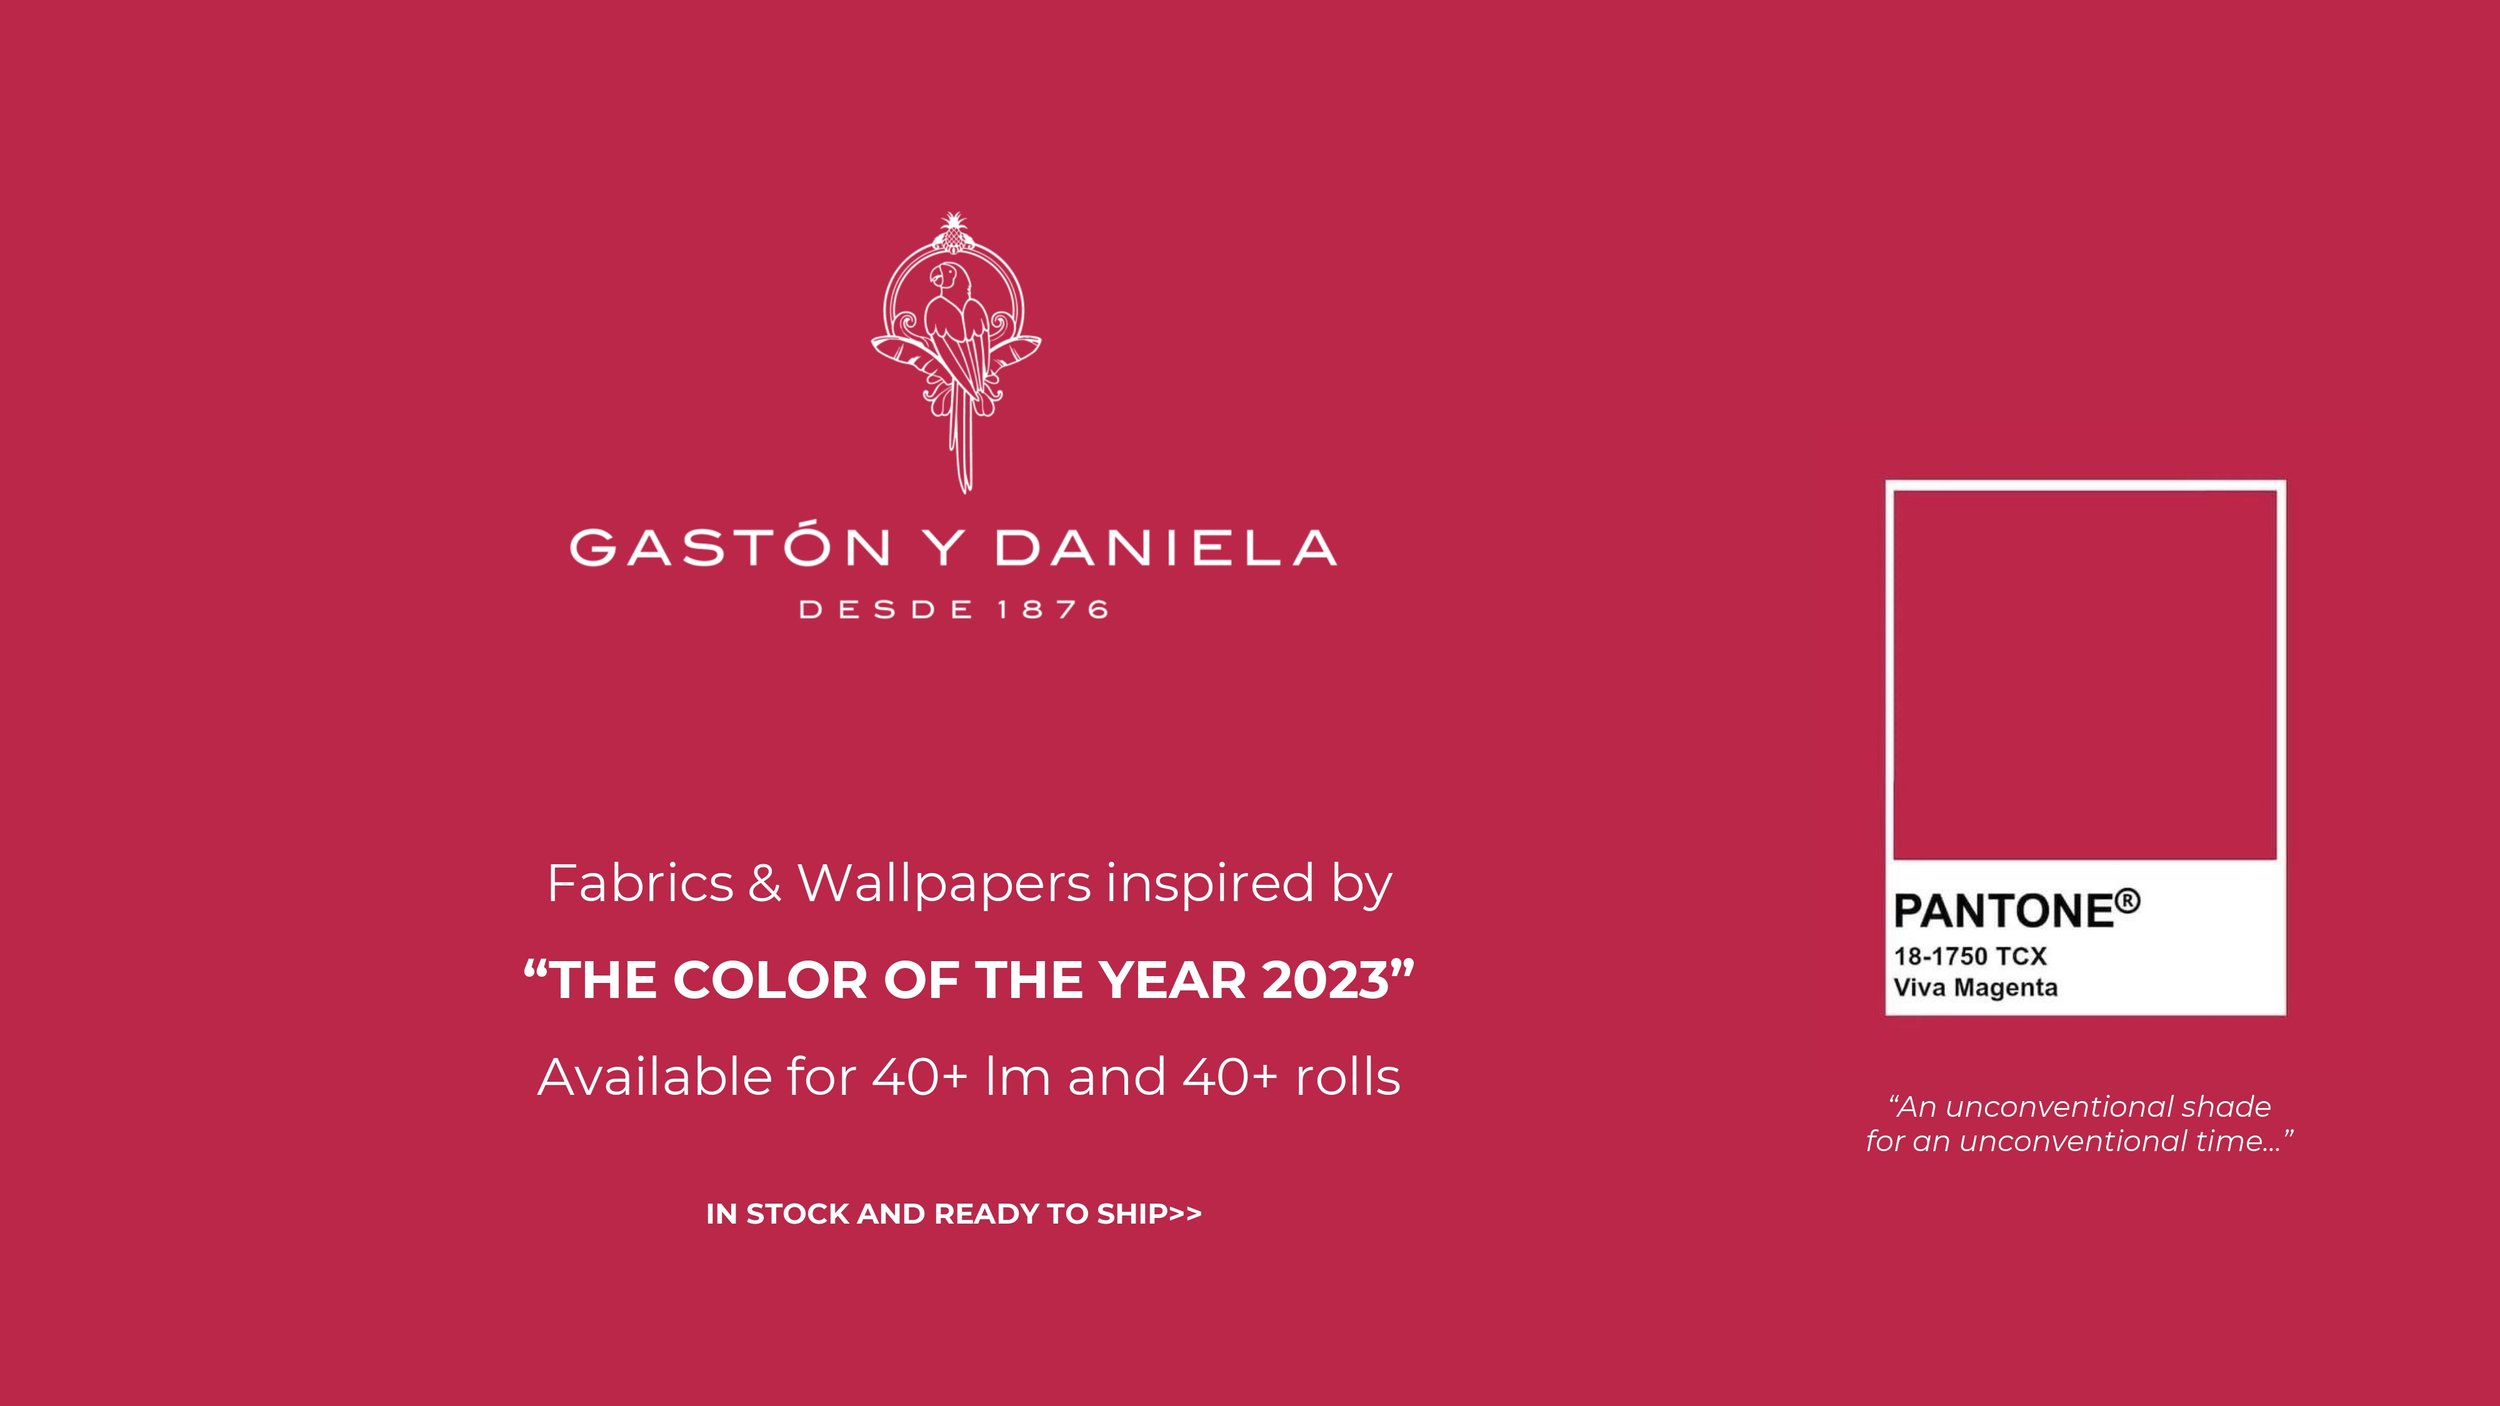 GYD - Fabrics & WP - COLOR OF THE YEAR 2023_page-0001.jpg